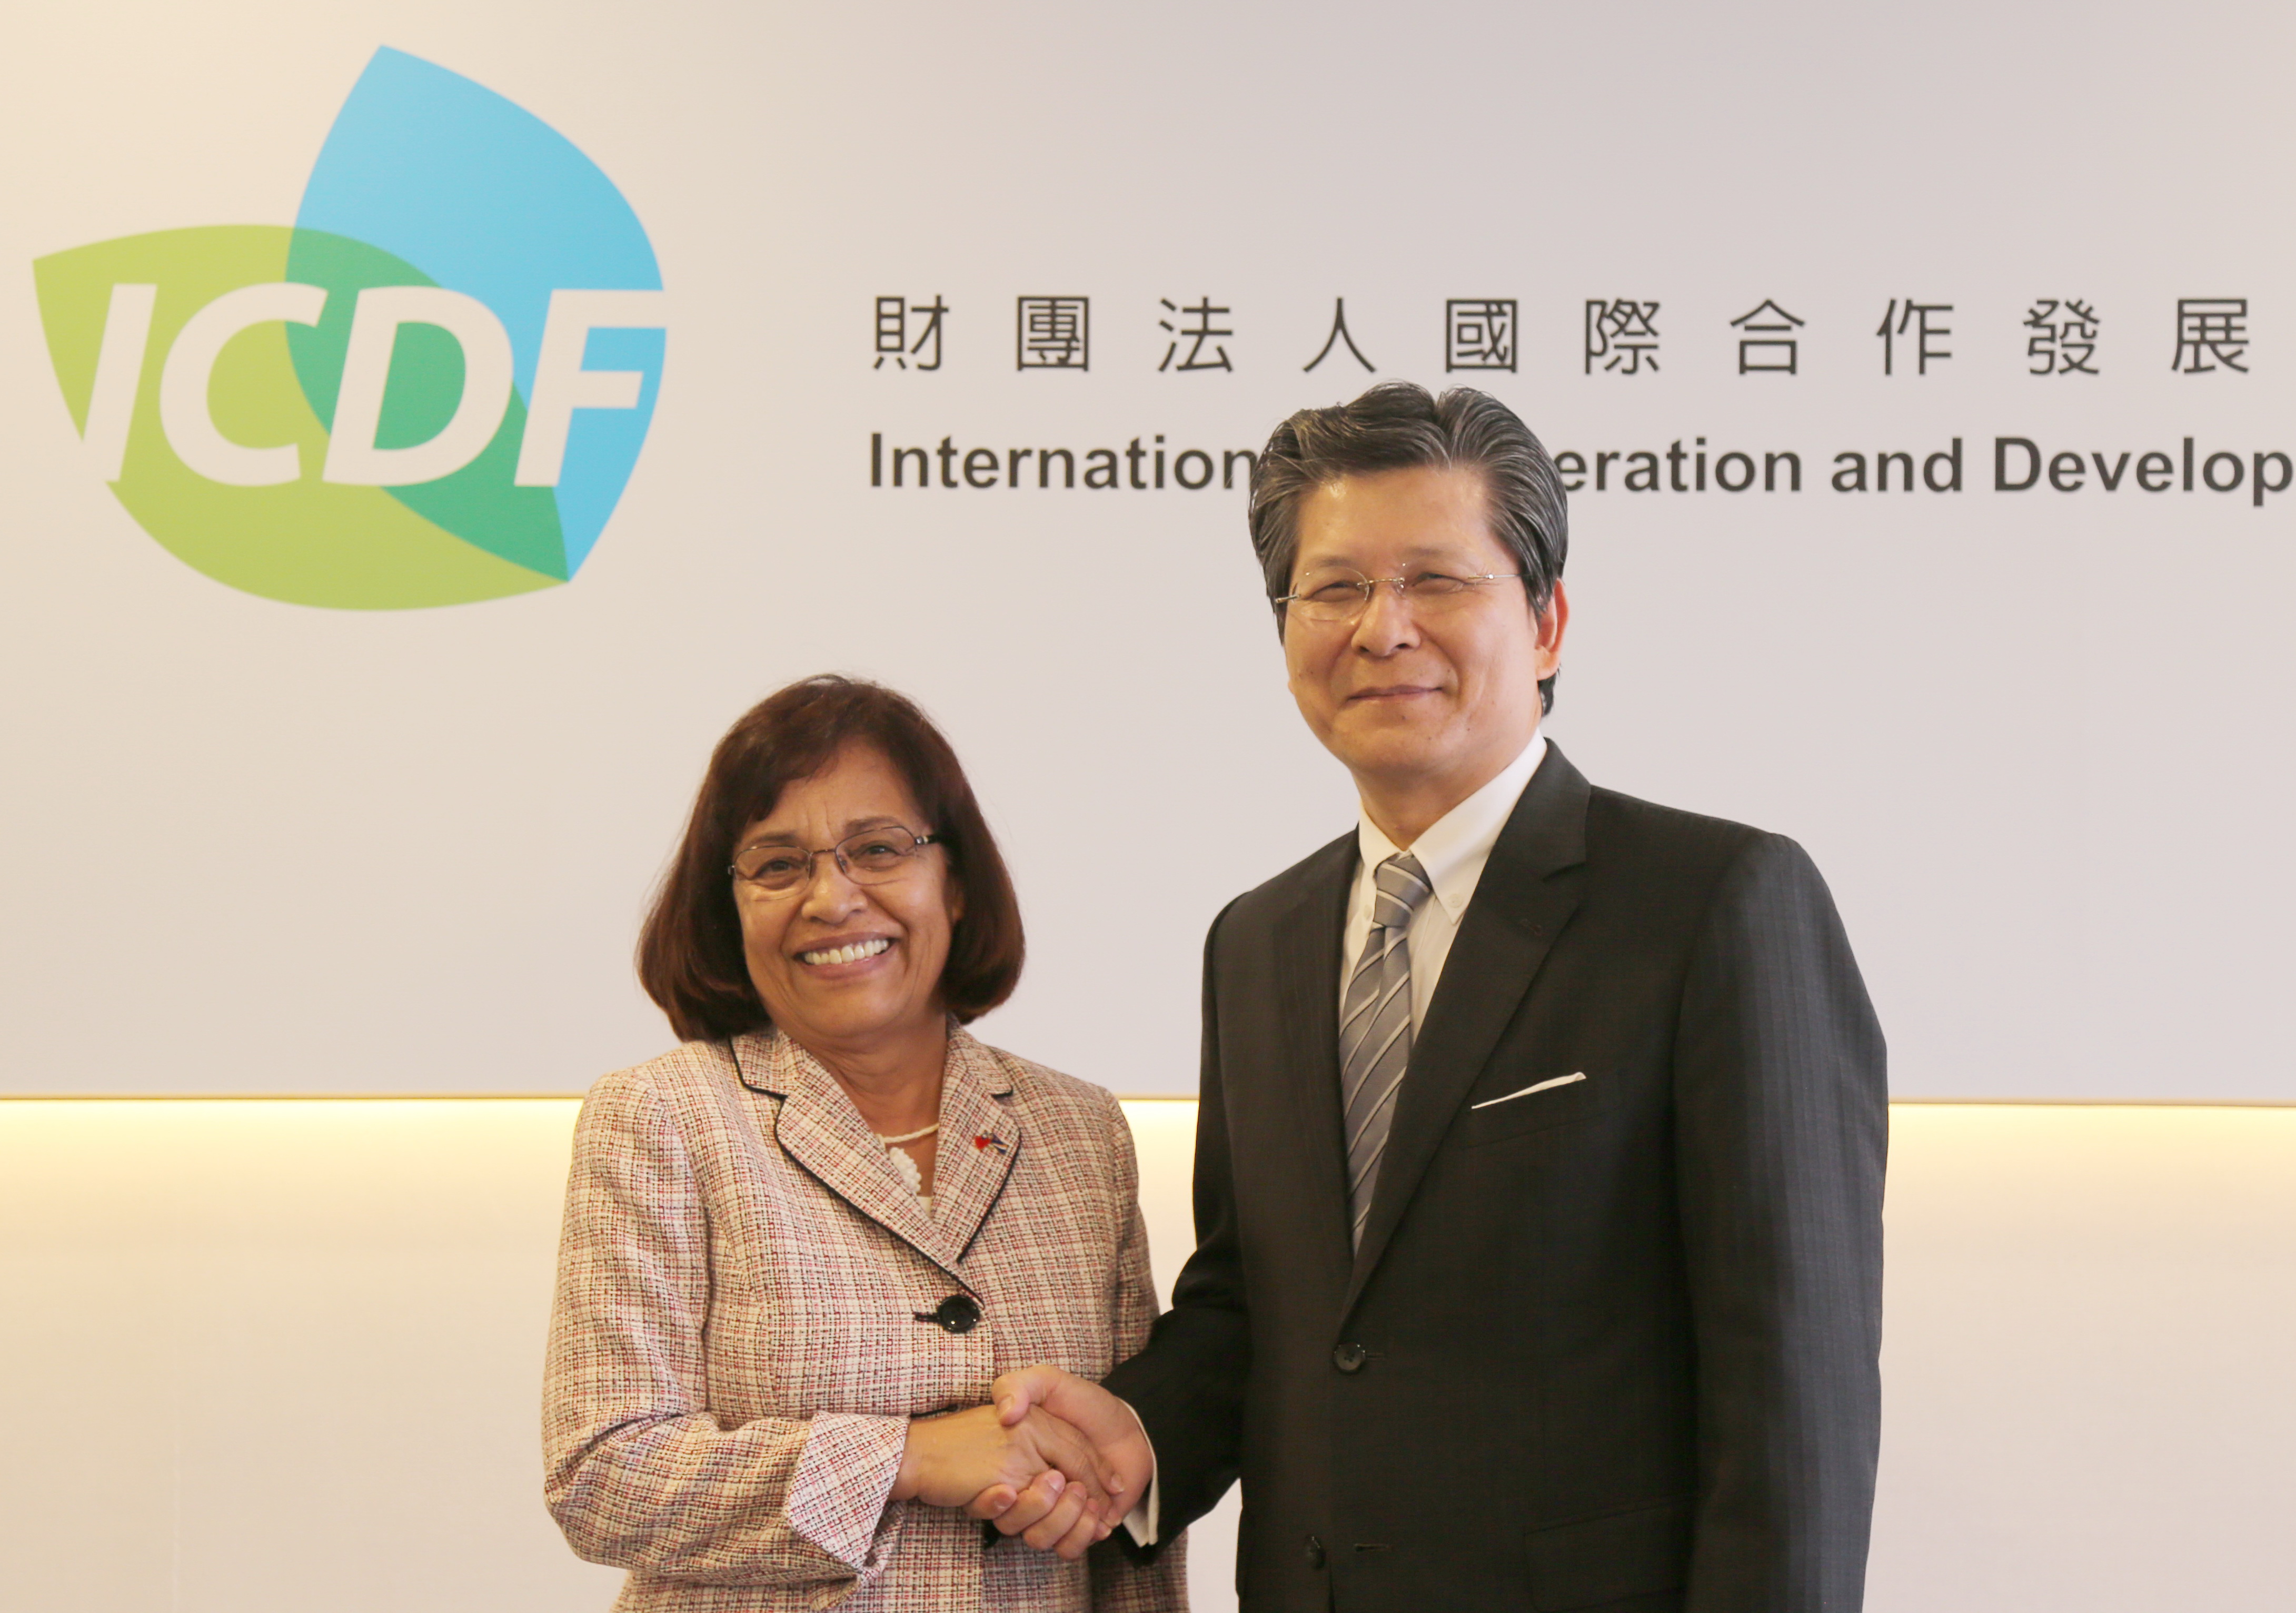 President of the Republic of the Marshall Islands H.E. Dr. Hilda C. Heine Visits TaiwanICDF